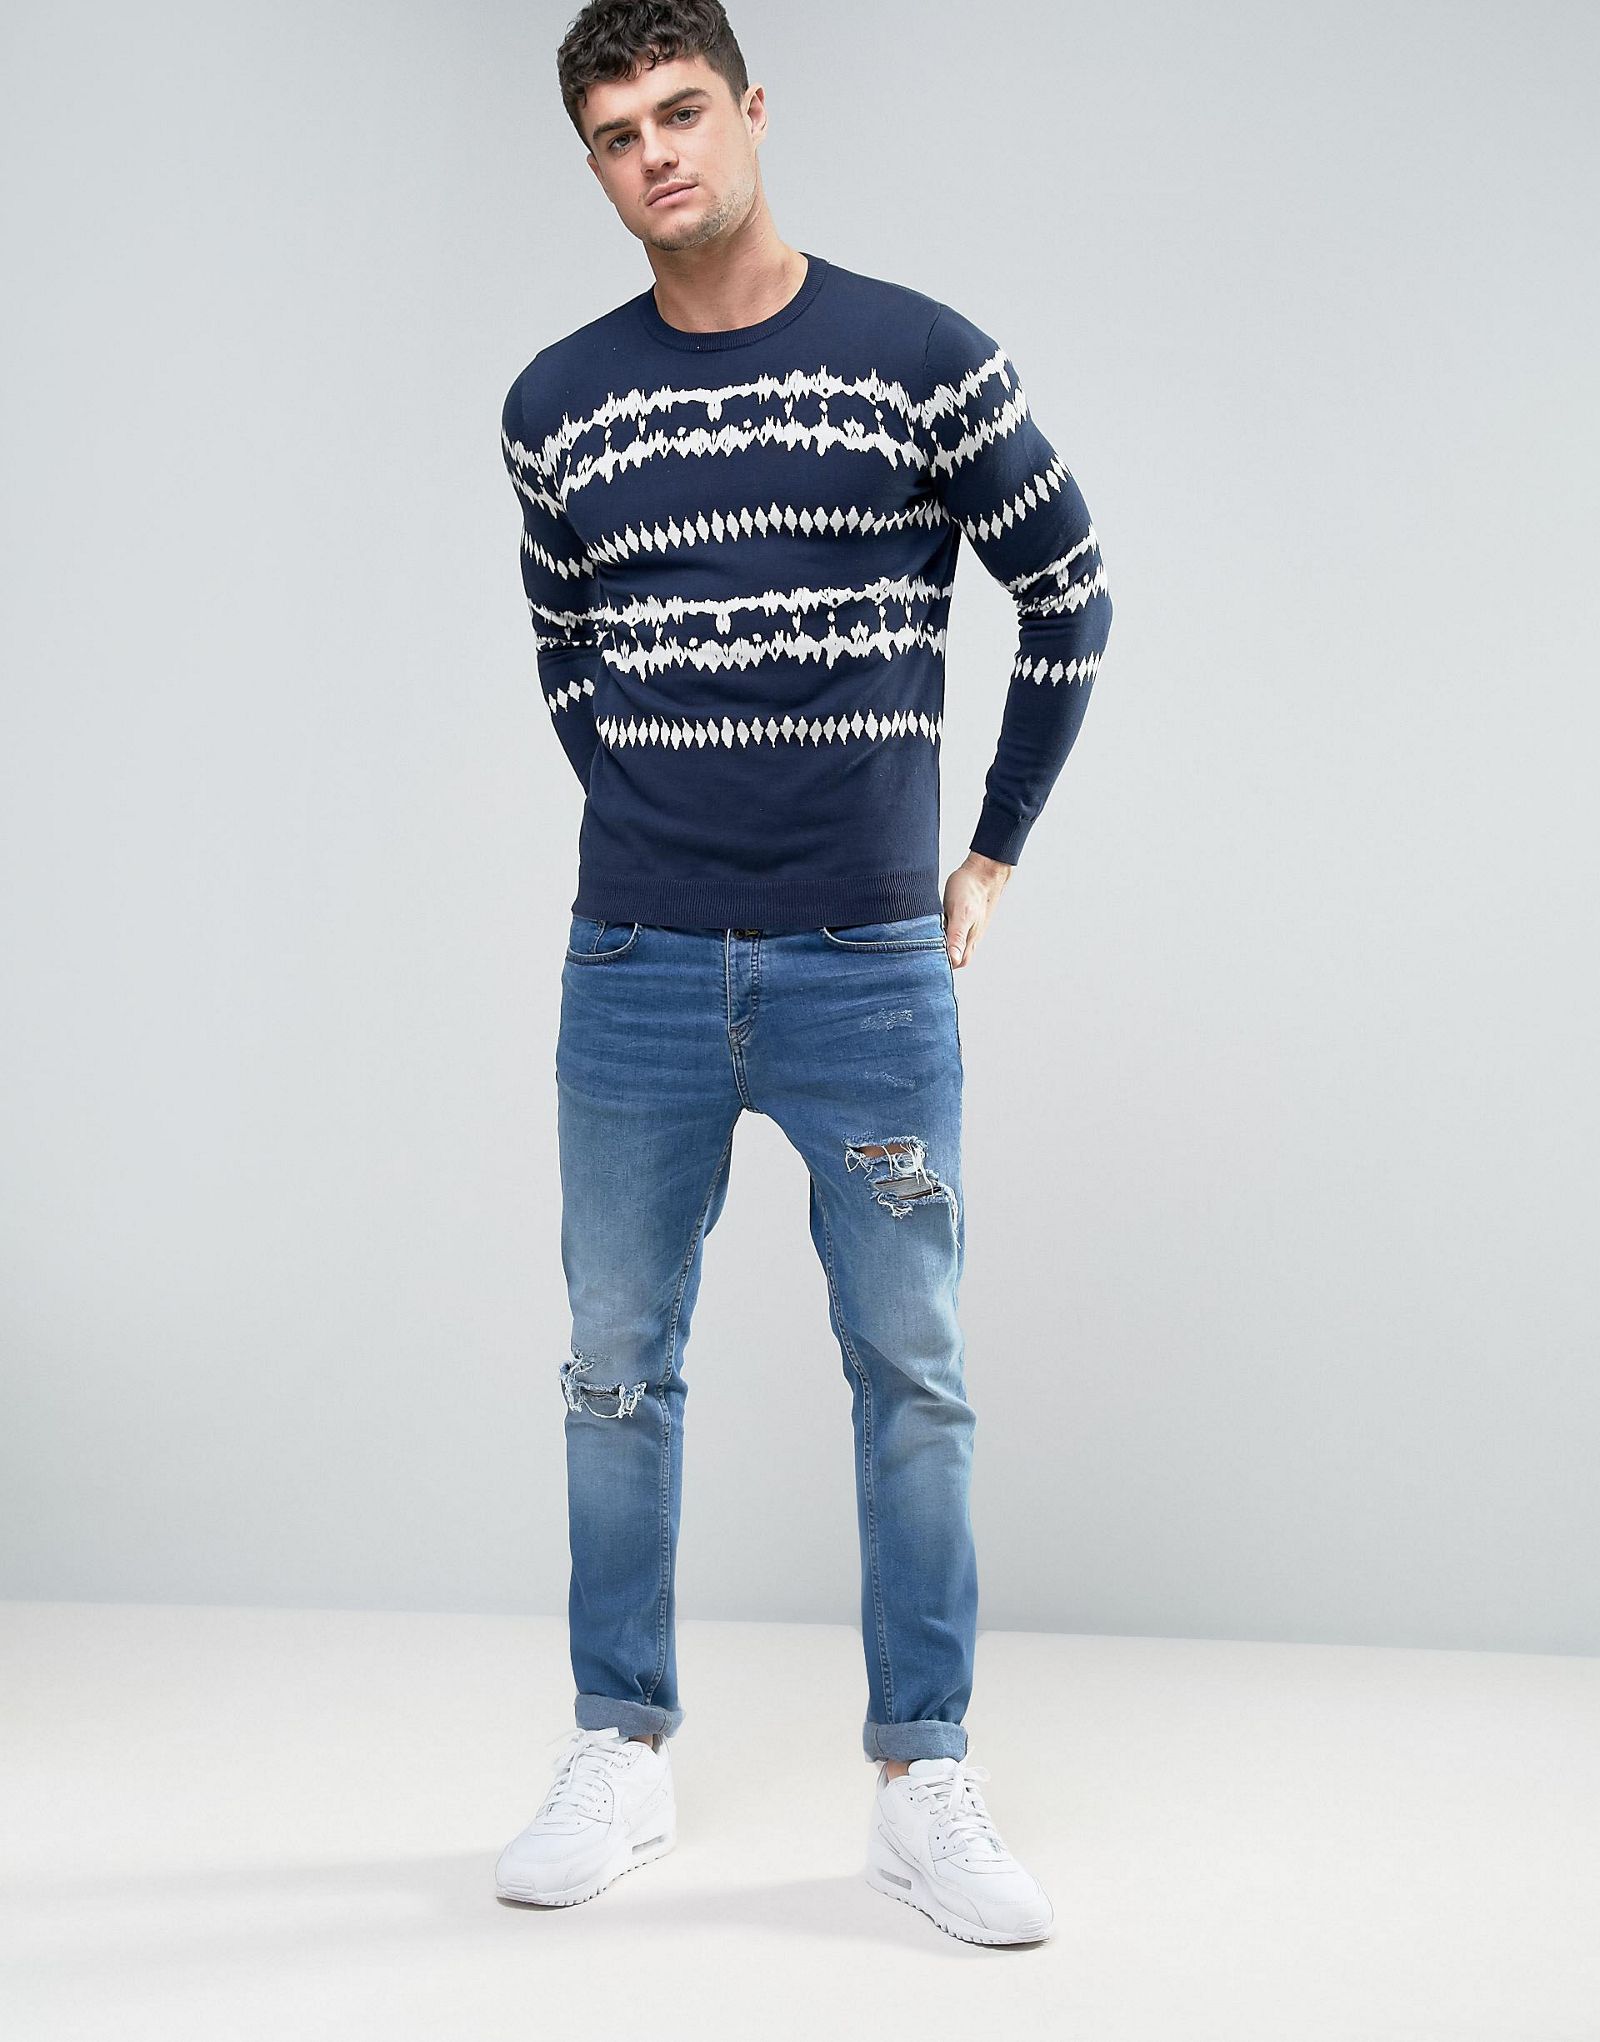 River Island Jumper With Ink Print In Navy